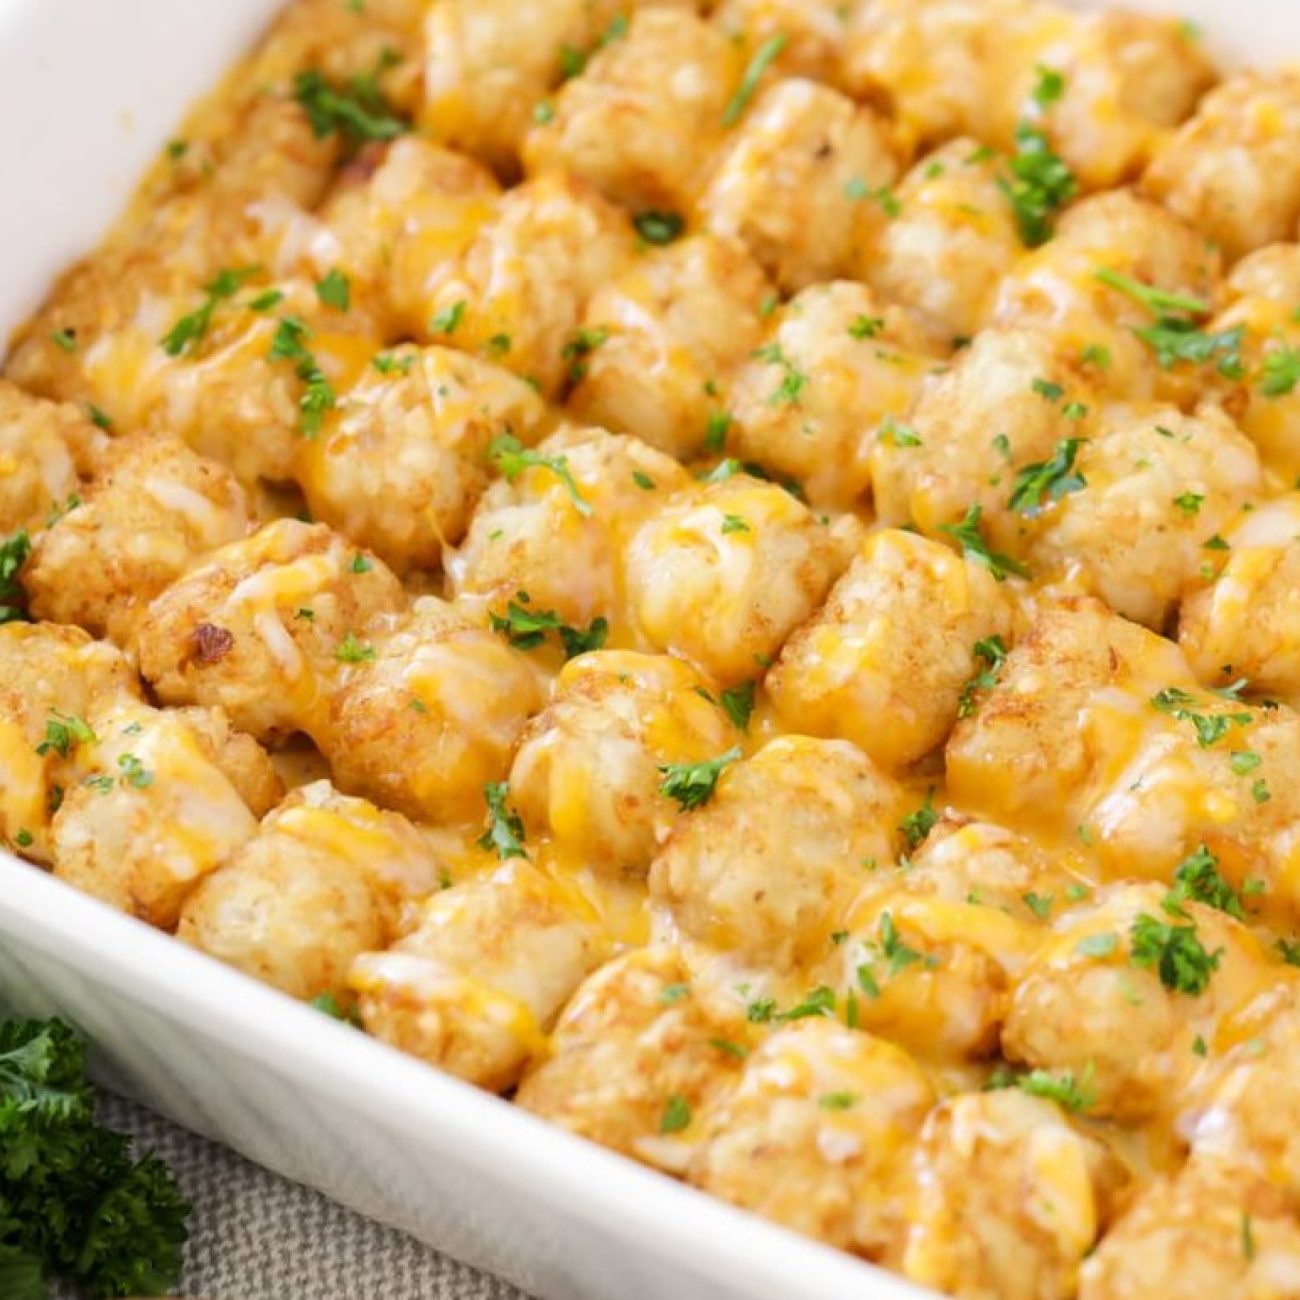 Vegetable-Packed Tater Tot Casserole Recipe